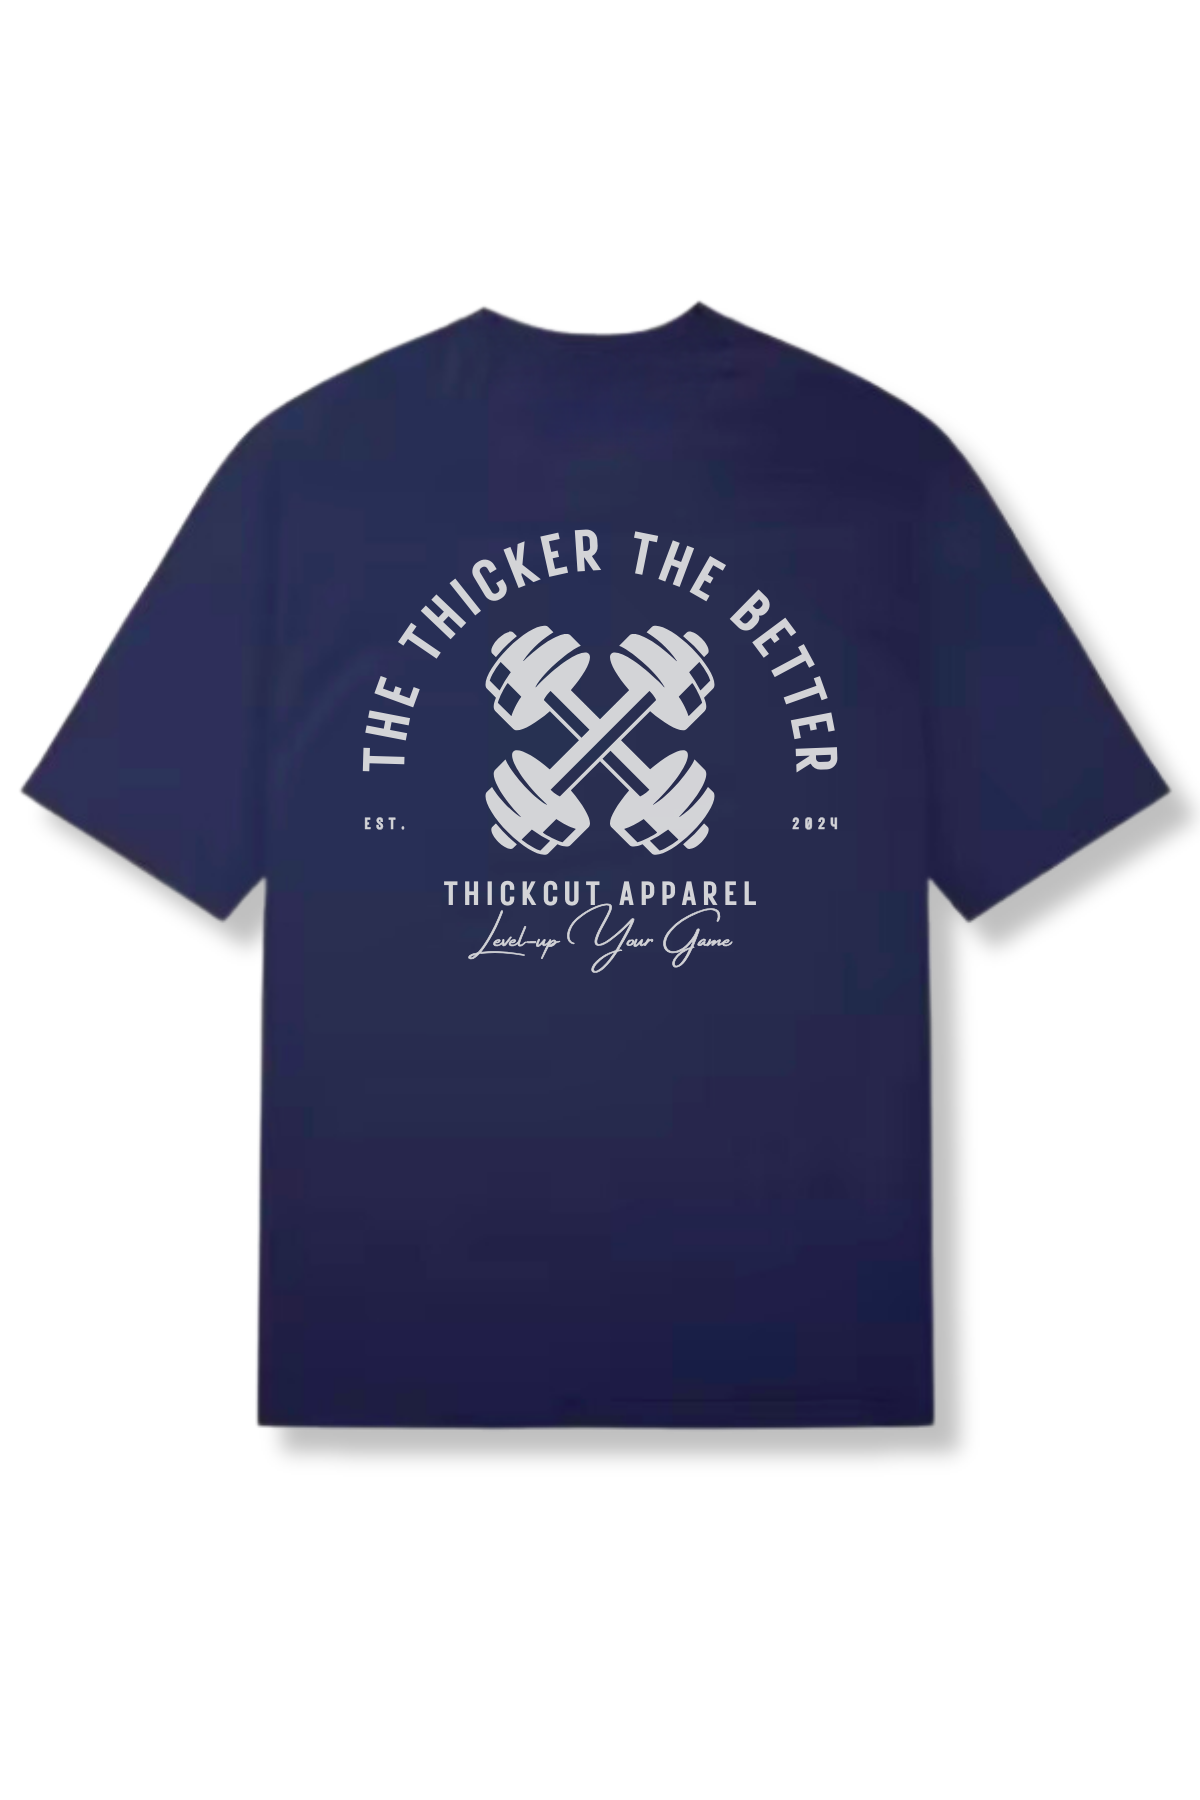 THE THICKER THE BETTER  Performance Shirt (Navy)